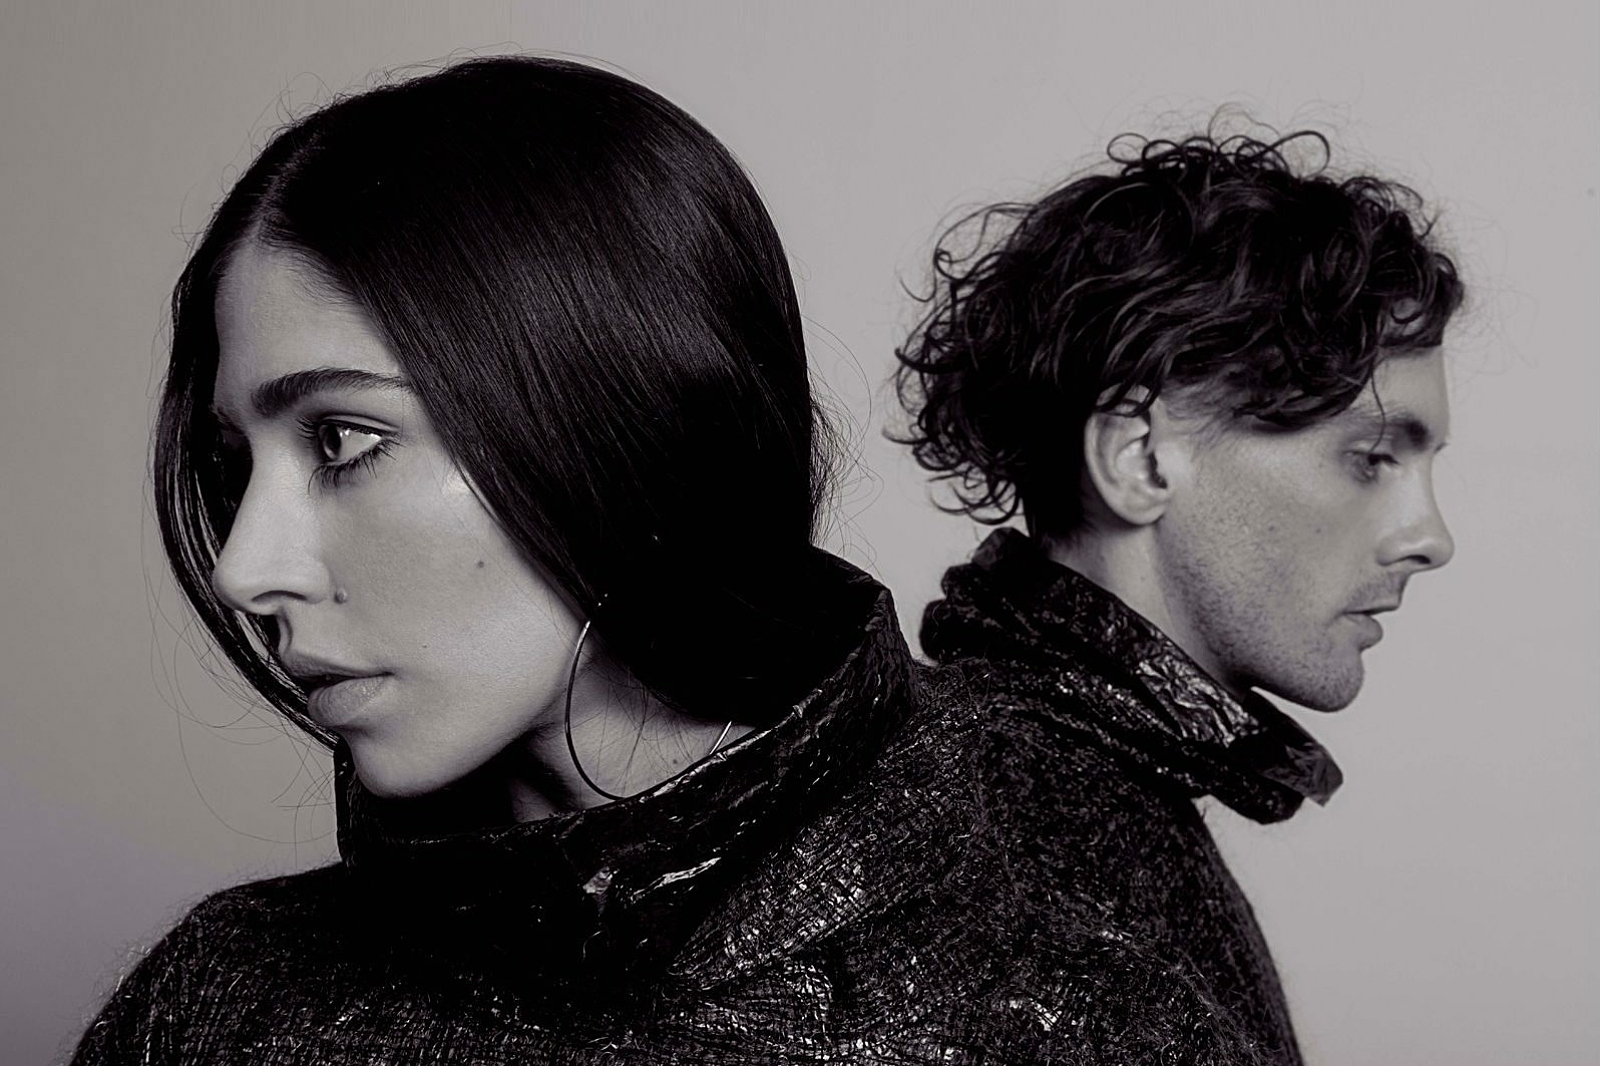 Watch footage from Chairlift's final show